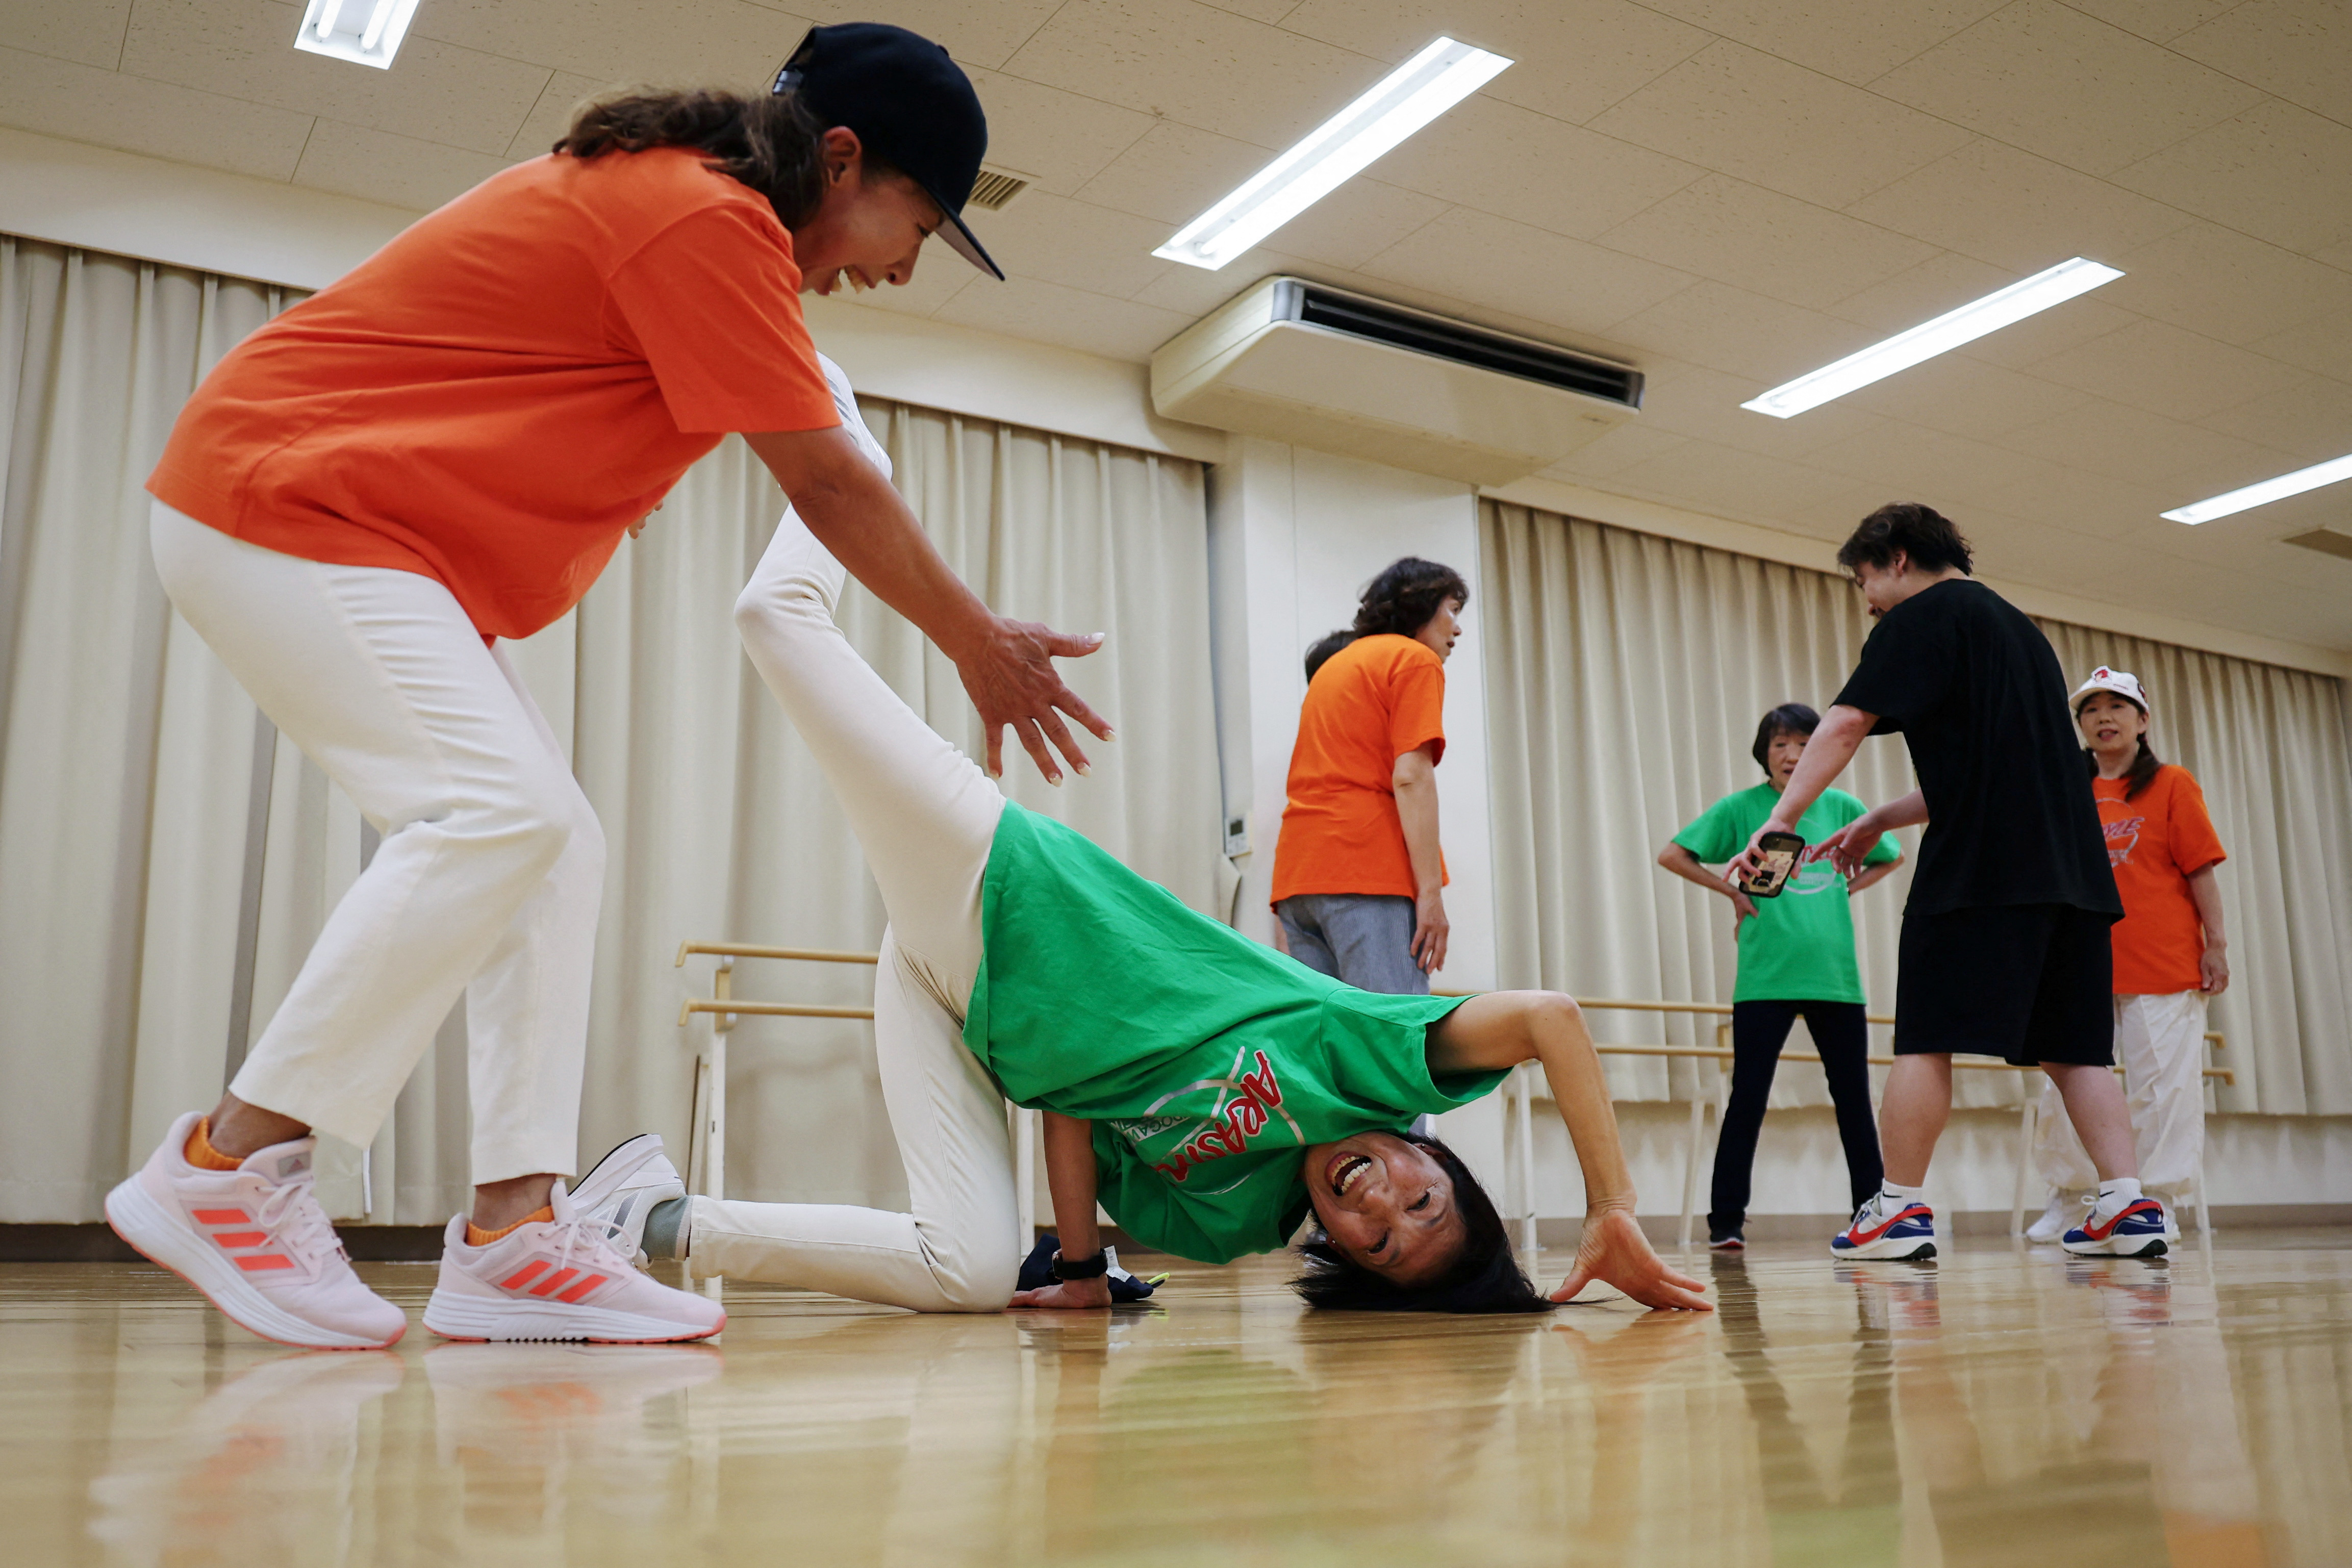 The Wider Image: Inspired by Olympics debut, Japan's seniors blaze breakdancing trail